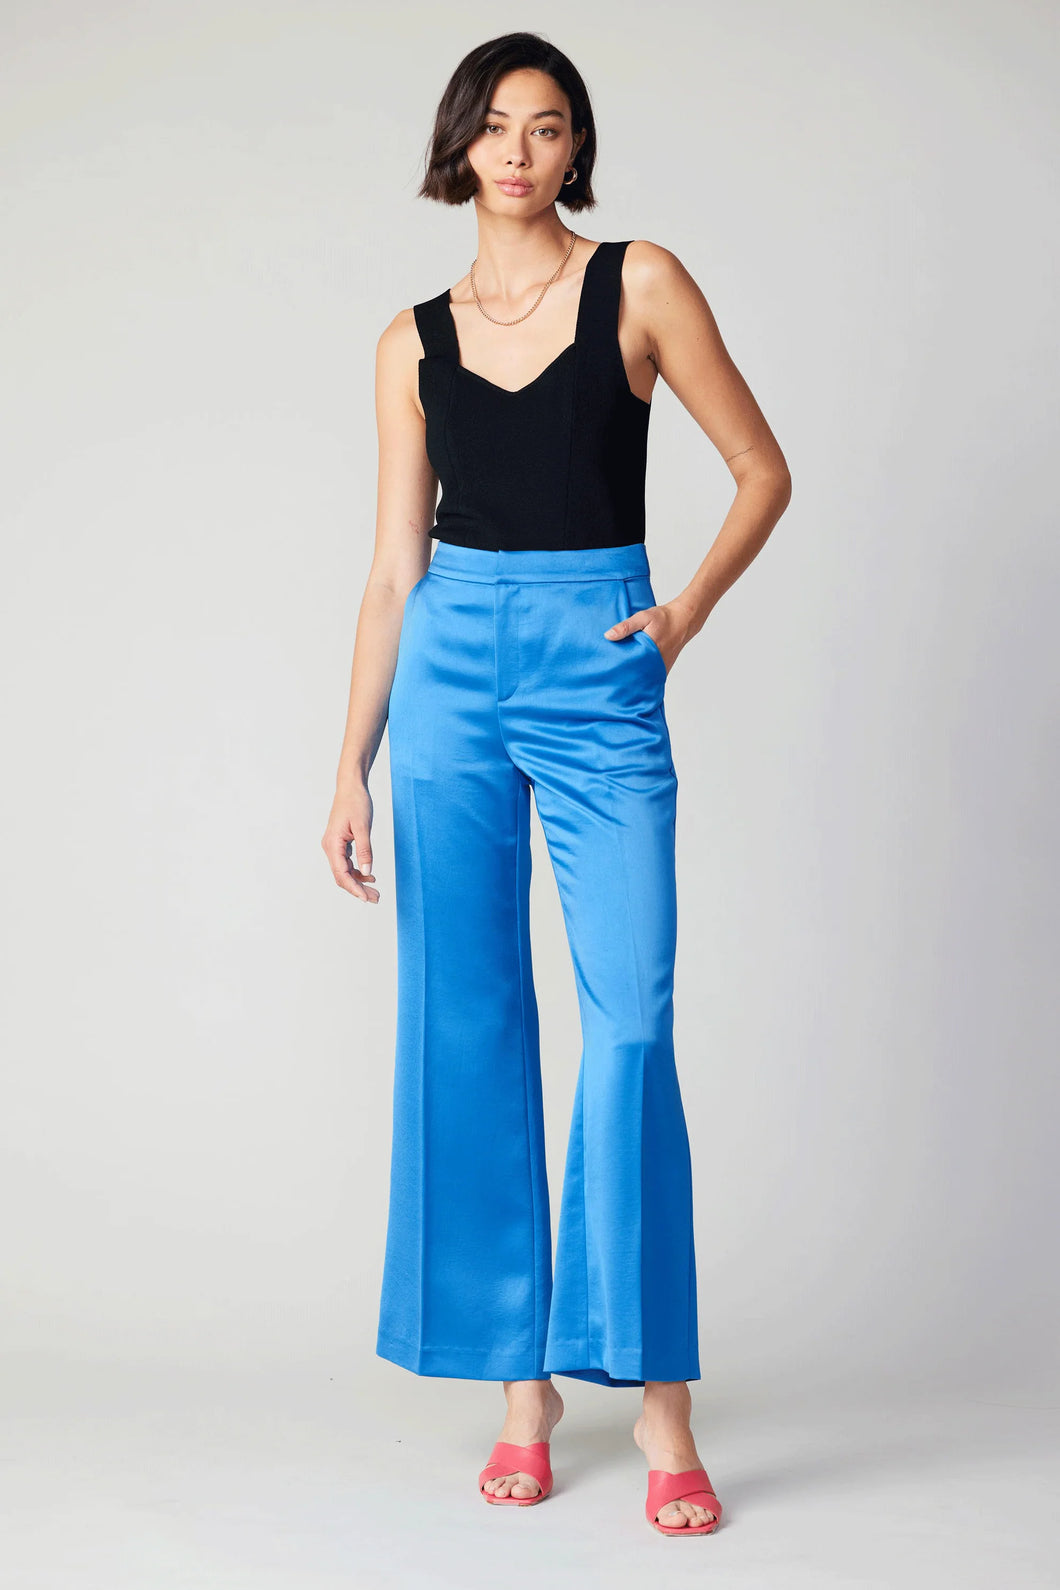 Elevate your style with these opulent wide-leg pants. With a high waist and loose fit, they add a touch of vibrancy and boldness to your ensemble. Featuring a sleek waistband and impeccable creasing, these pants are the epitome of elegance.